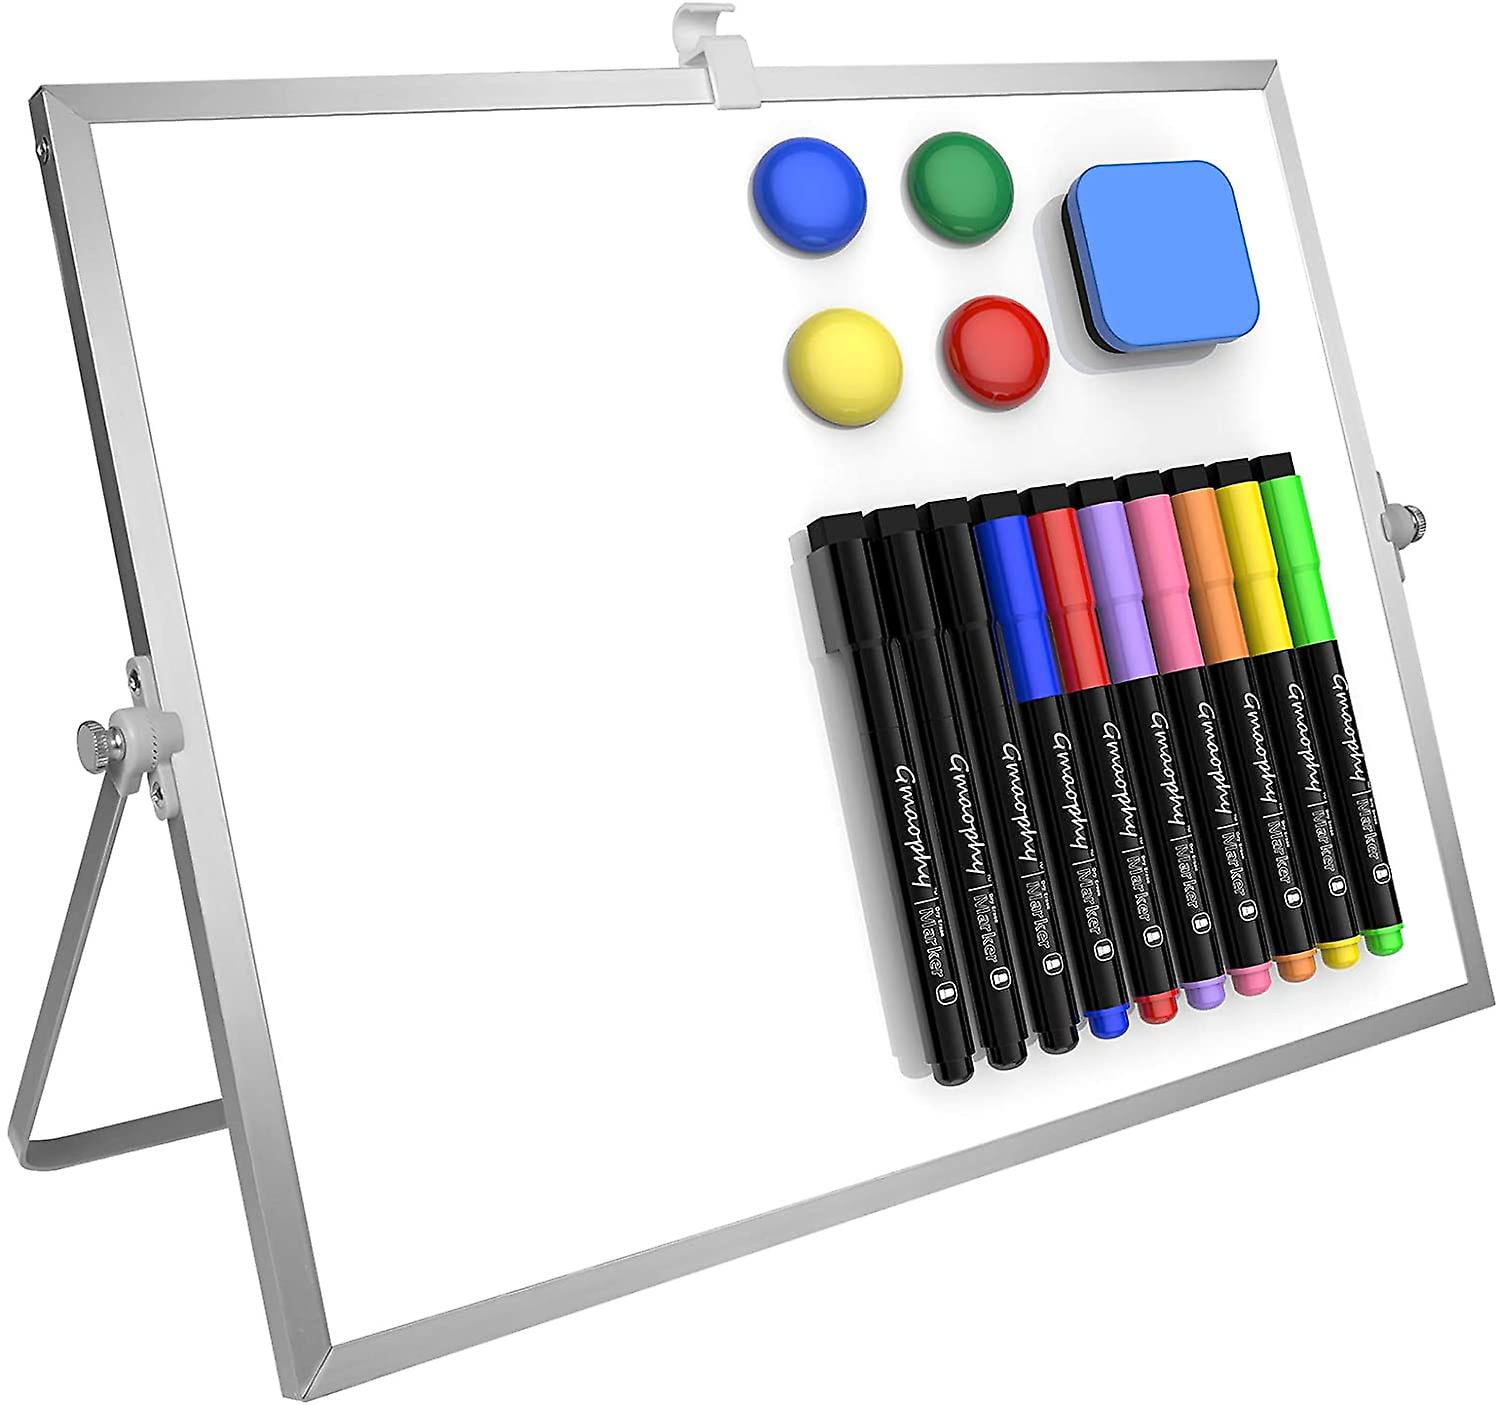 Dry Erase White Board 1 Eraser Portable Double-Sided White Board Easel for Kids Drawing to Do List Wall Desk School 10 Markers 12 X 12 Large Magnetic Desktop Whiteboard with Stand 4 Magnets 